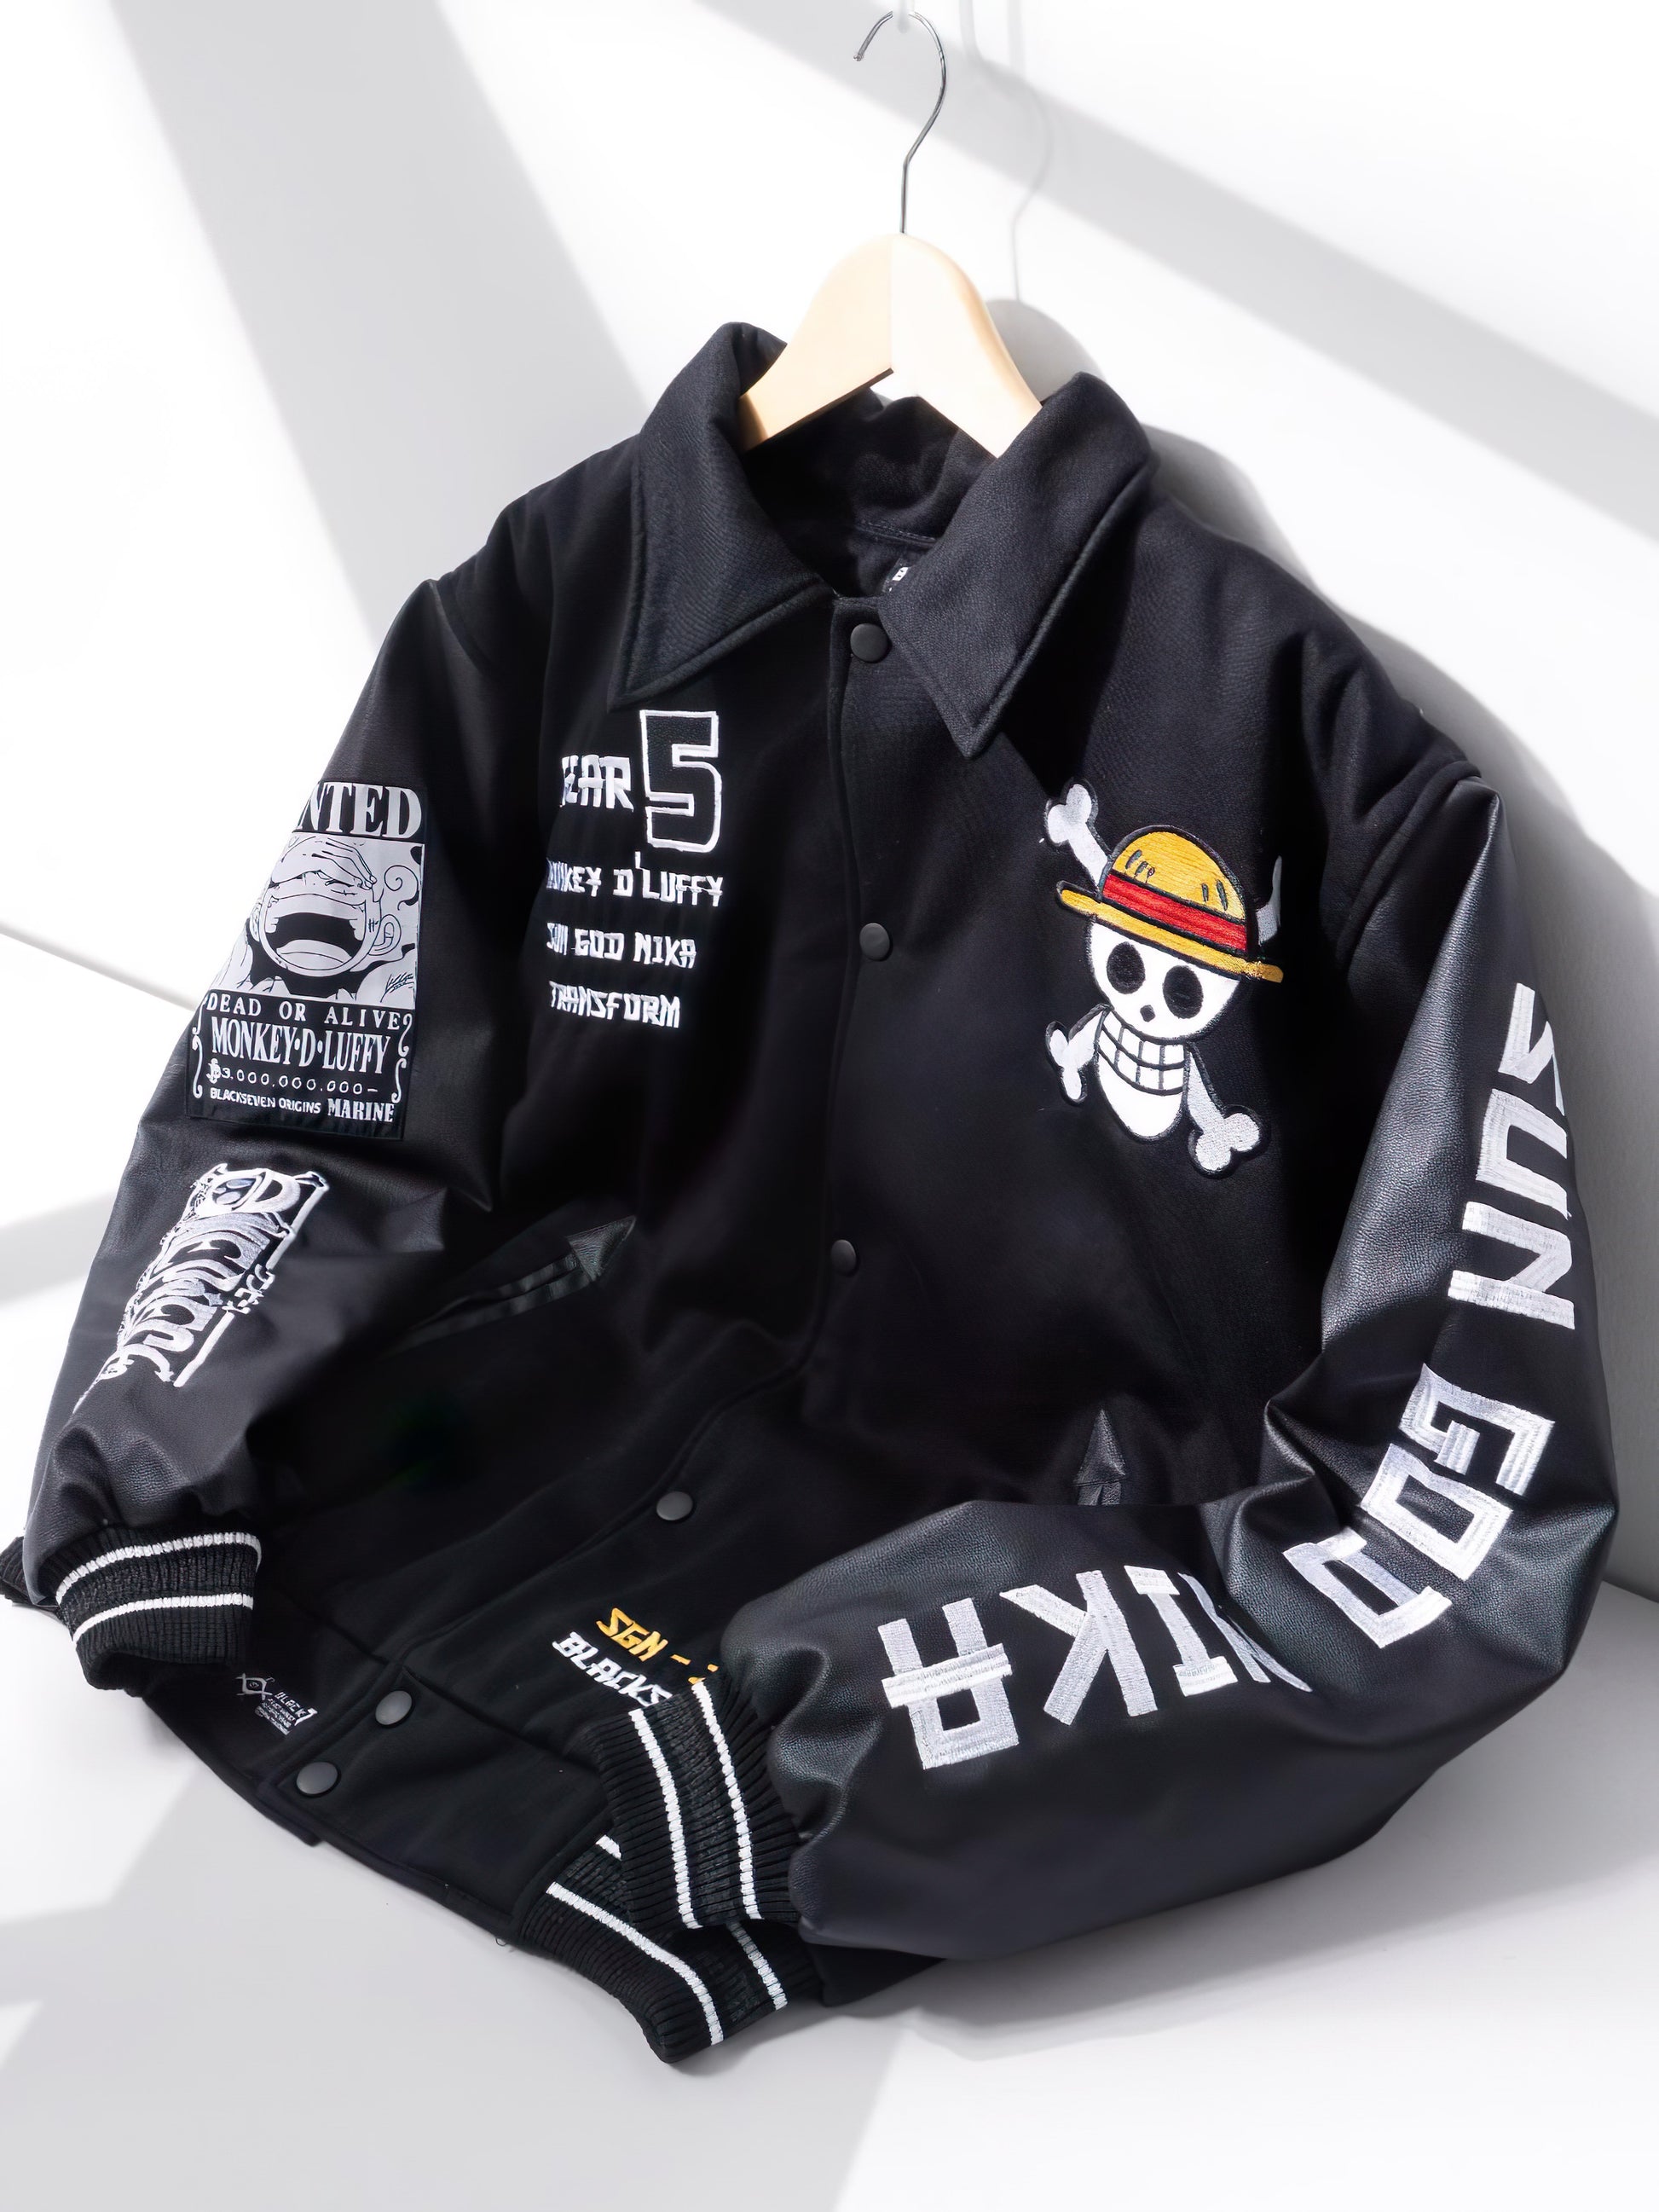 One Piece Gear 5 Varsity Jacket with Full Embroidery Design - Japan Fashion | Zewearsy Store